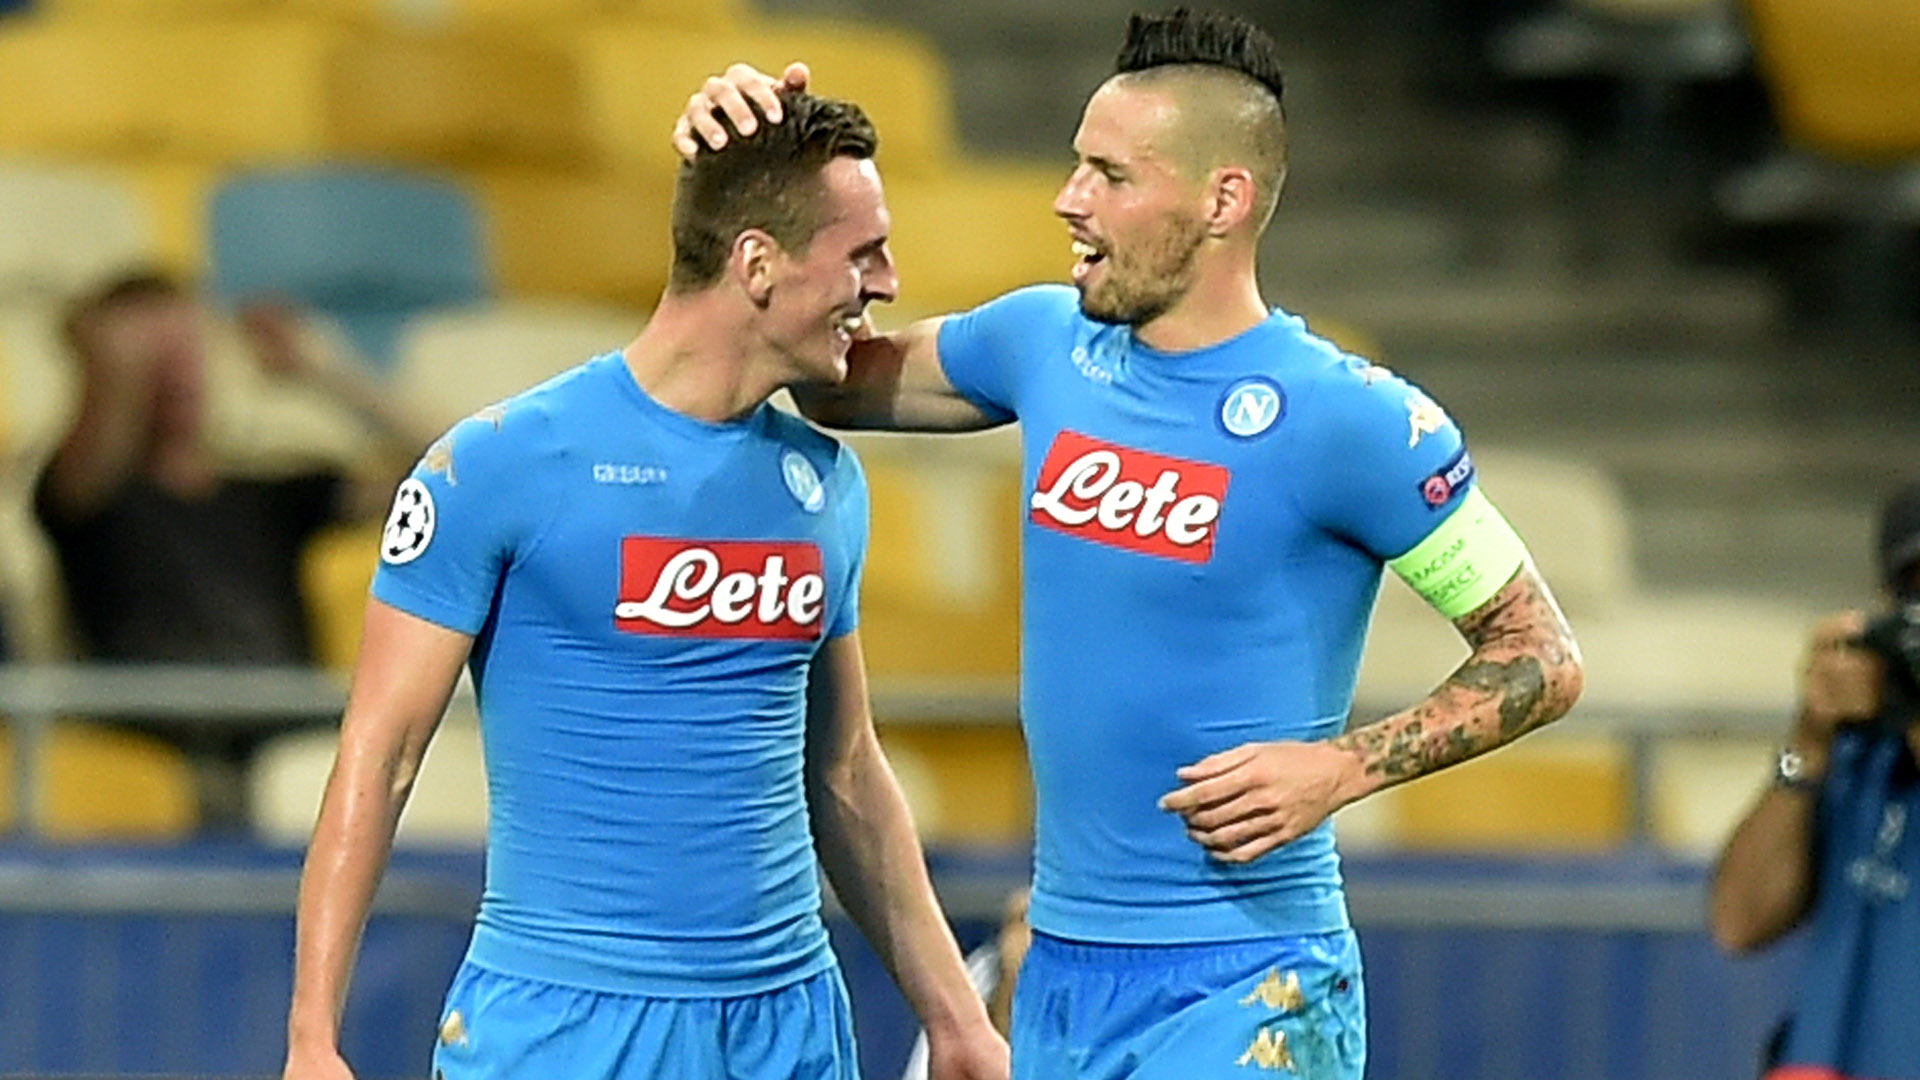 SSC Napoli's Arkadiusz Milik (L ) and Marek Hamsik celebrate after scoring a goal during the UEFA Champions League football match between FC Dynamo and SSC Napoli at the Olympiyski Stadium in Kiev on September 13, 2016.  / AFP / SERGEI SUPINSKY        (Photo credit should read SERGEI SUPINSKY/AFP/Getty Images)